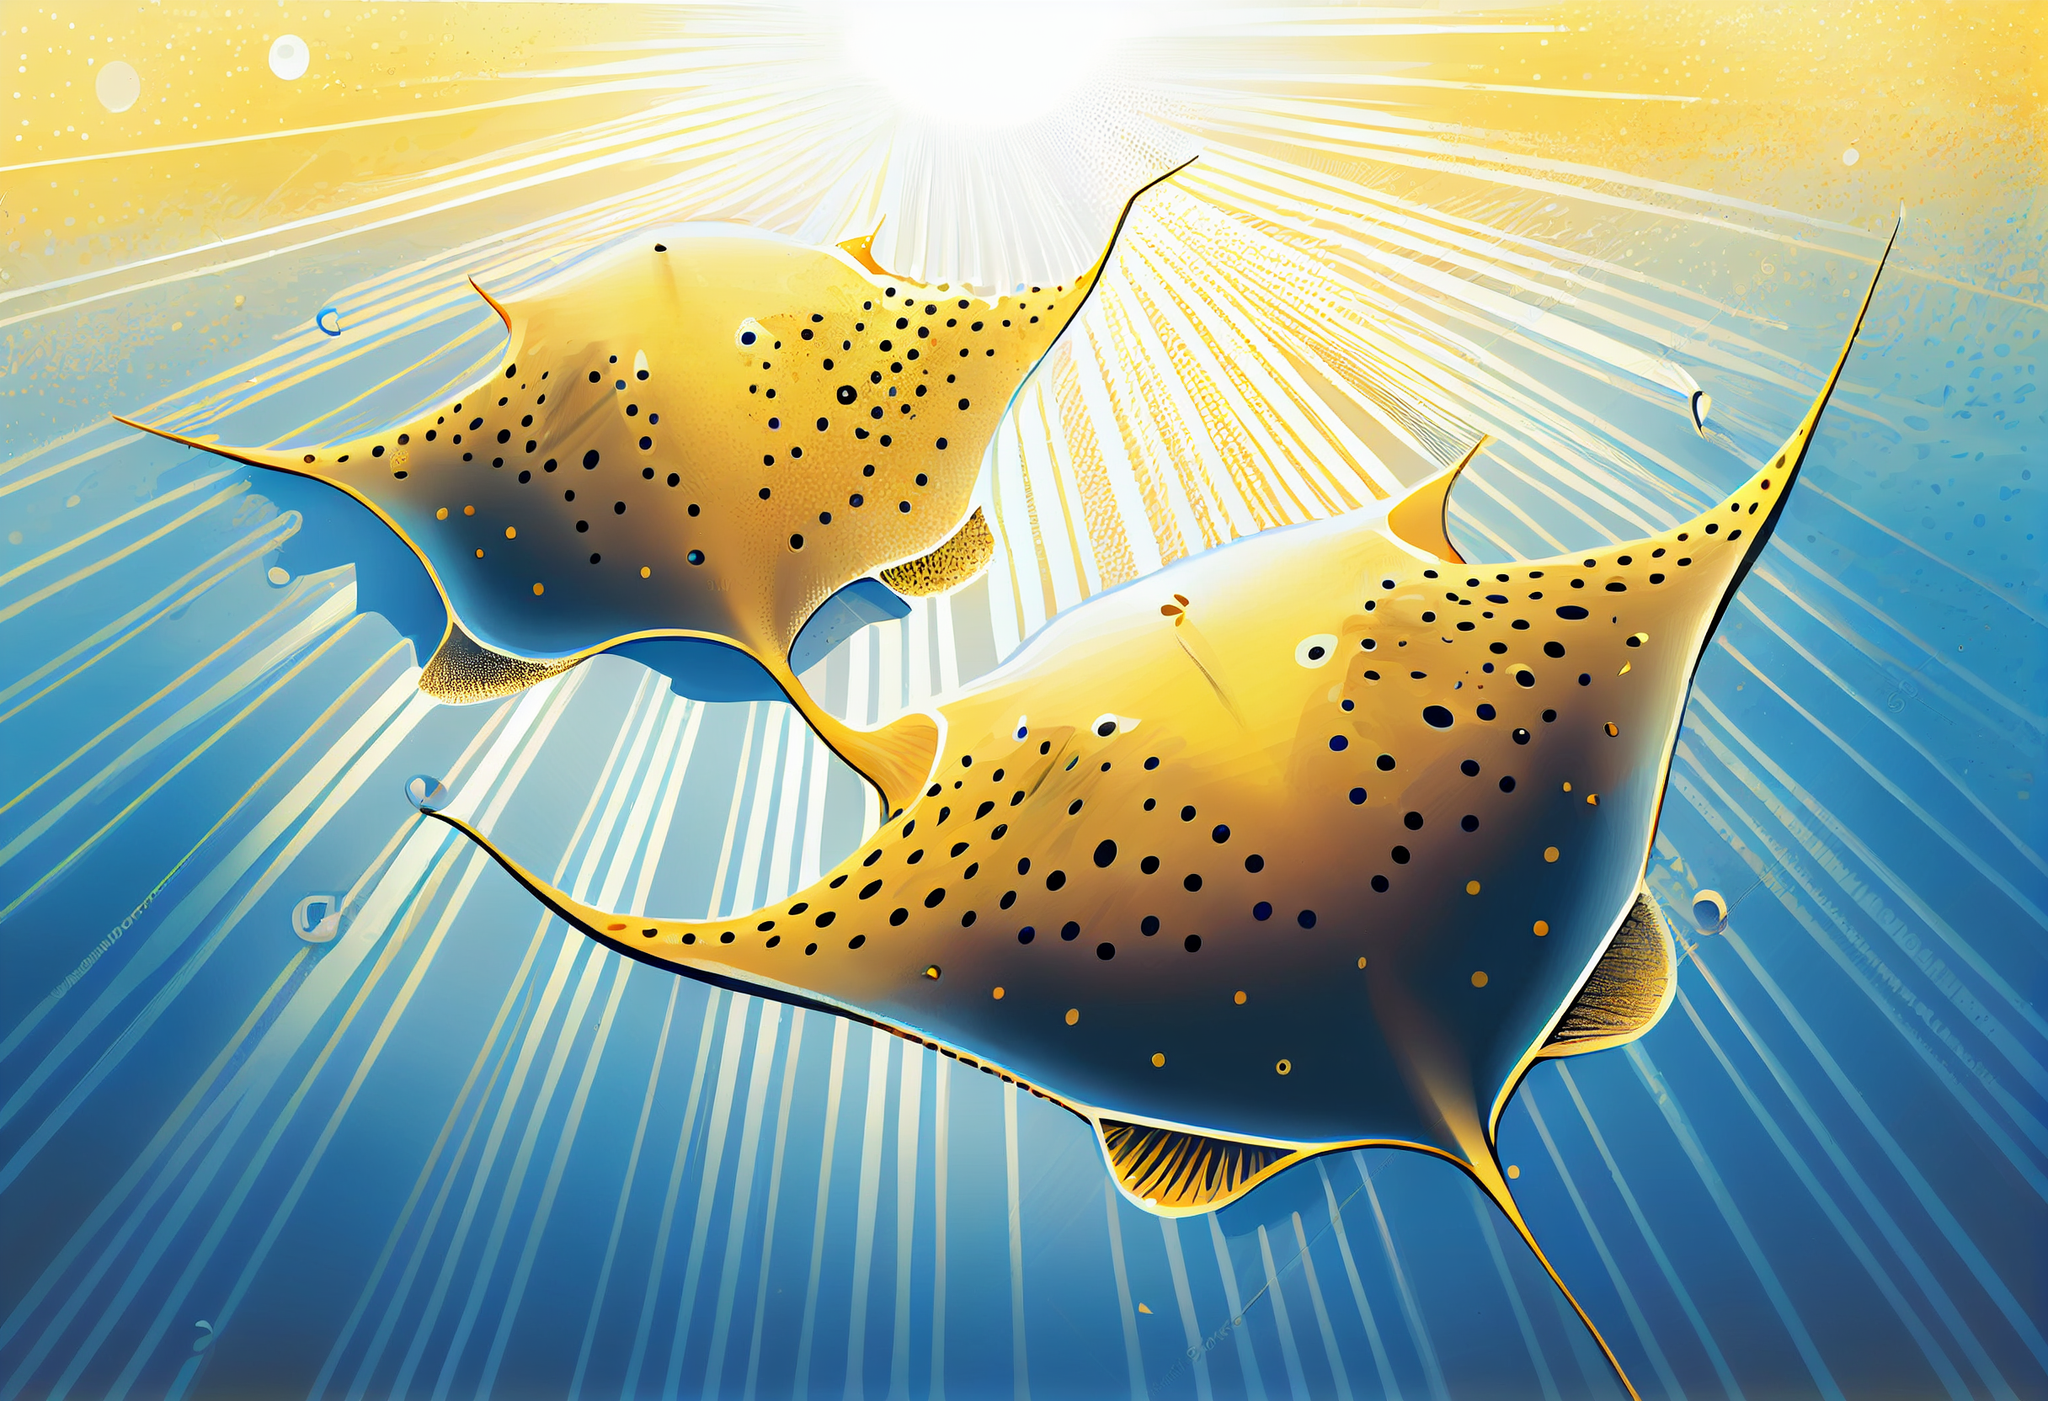 Golden Stingrays in Blue Ocean Print: Acrylic Color Print with Dotted Design and Warm Sunlight